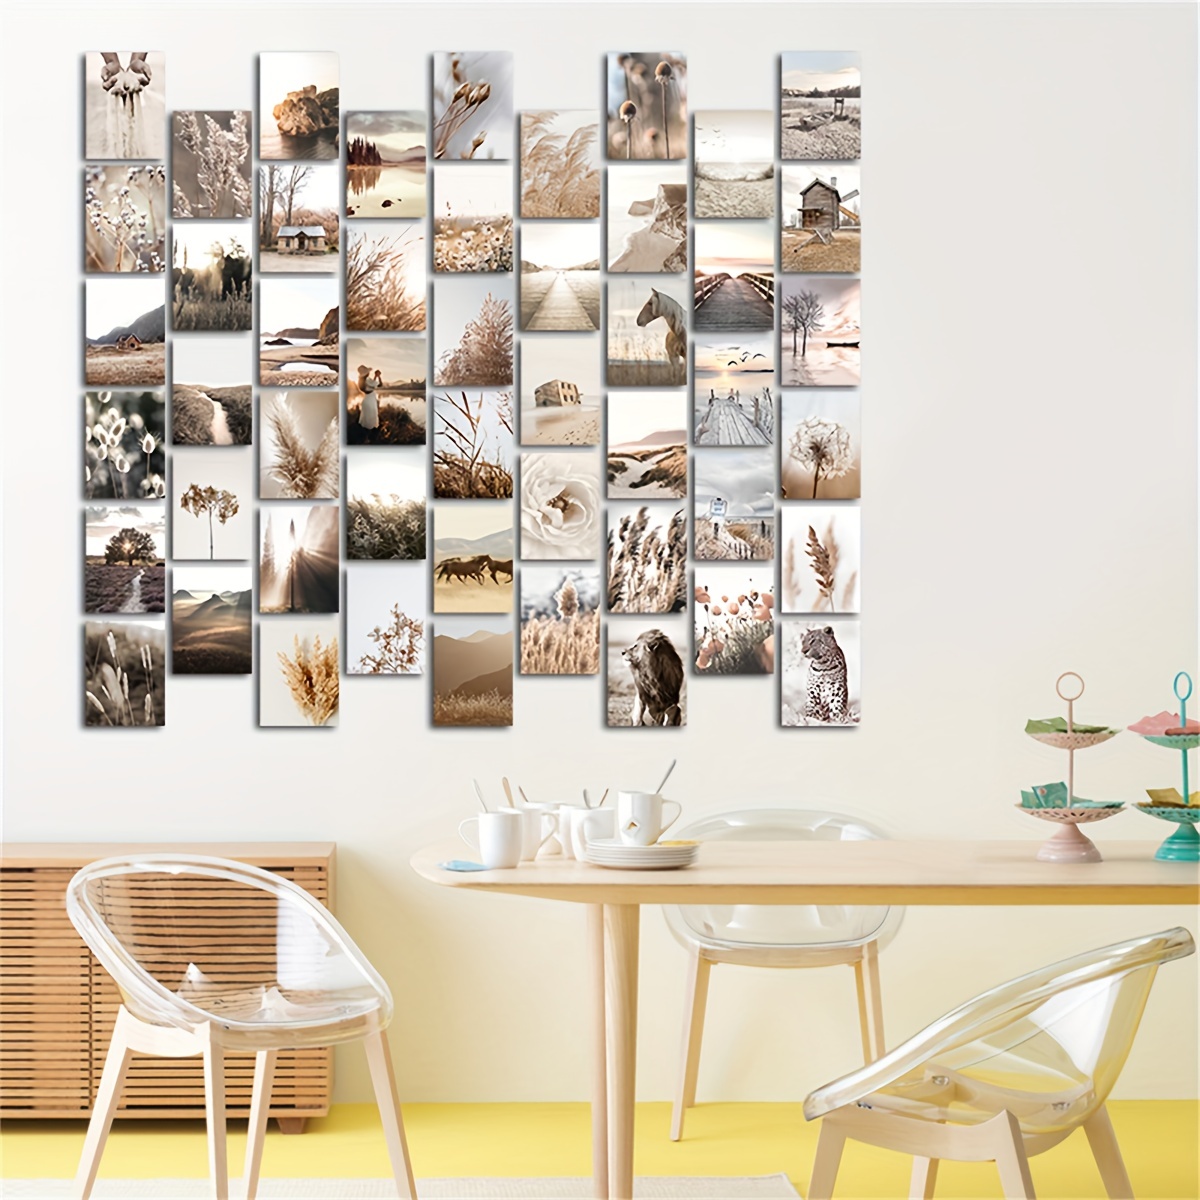 Wall Collage Kit Vintage 70Pcs Aesthetic Room Posters Bedroom Decor for  Teen Girls 70 photo collages ,Dorm Wall Decor, Teen Room Decor